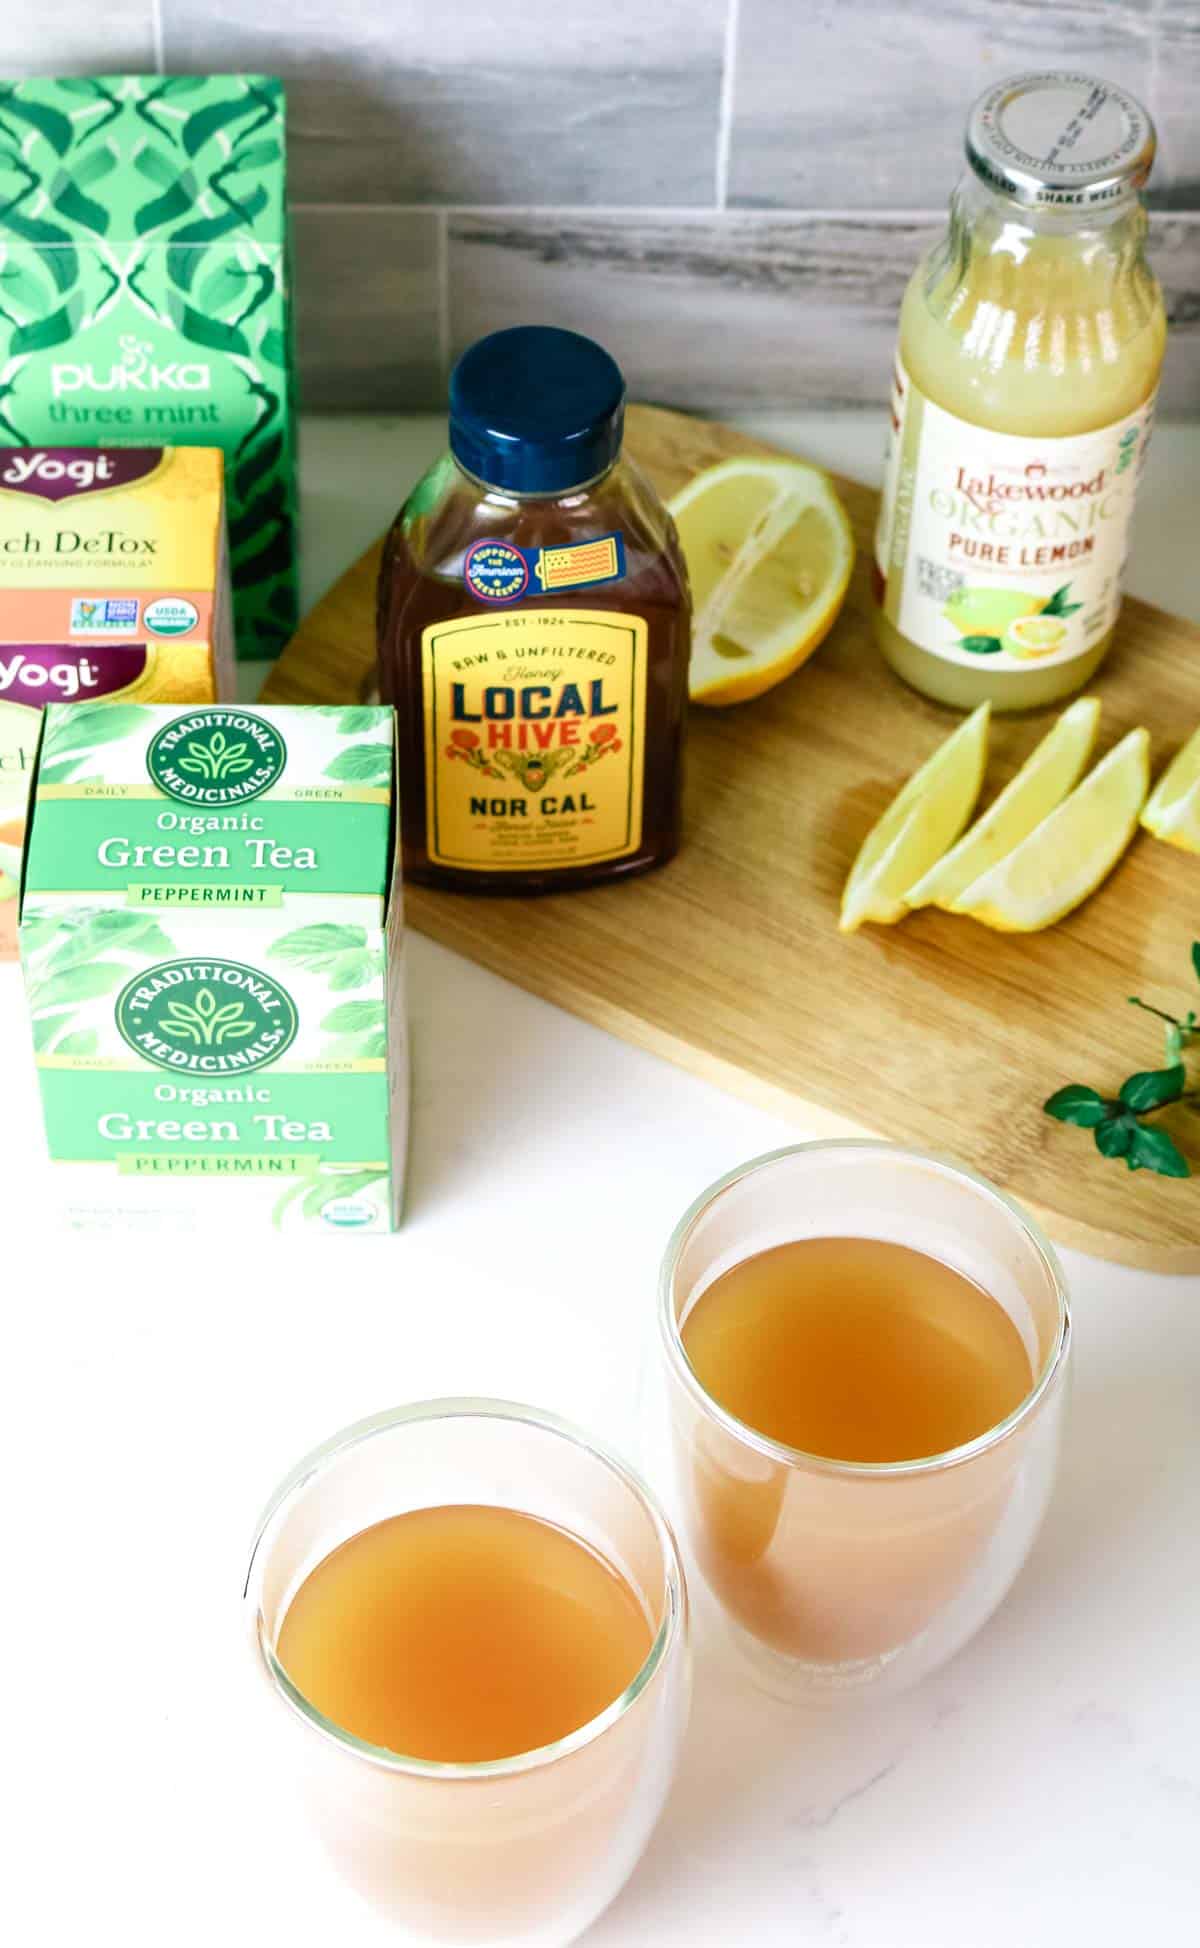 Image of 2 mugs of Honey Citrus Mint Tea and tea boxes, honey, lemon juice and wedges in the background